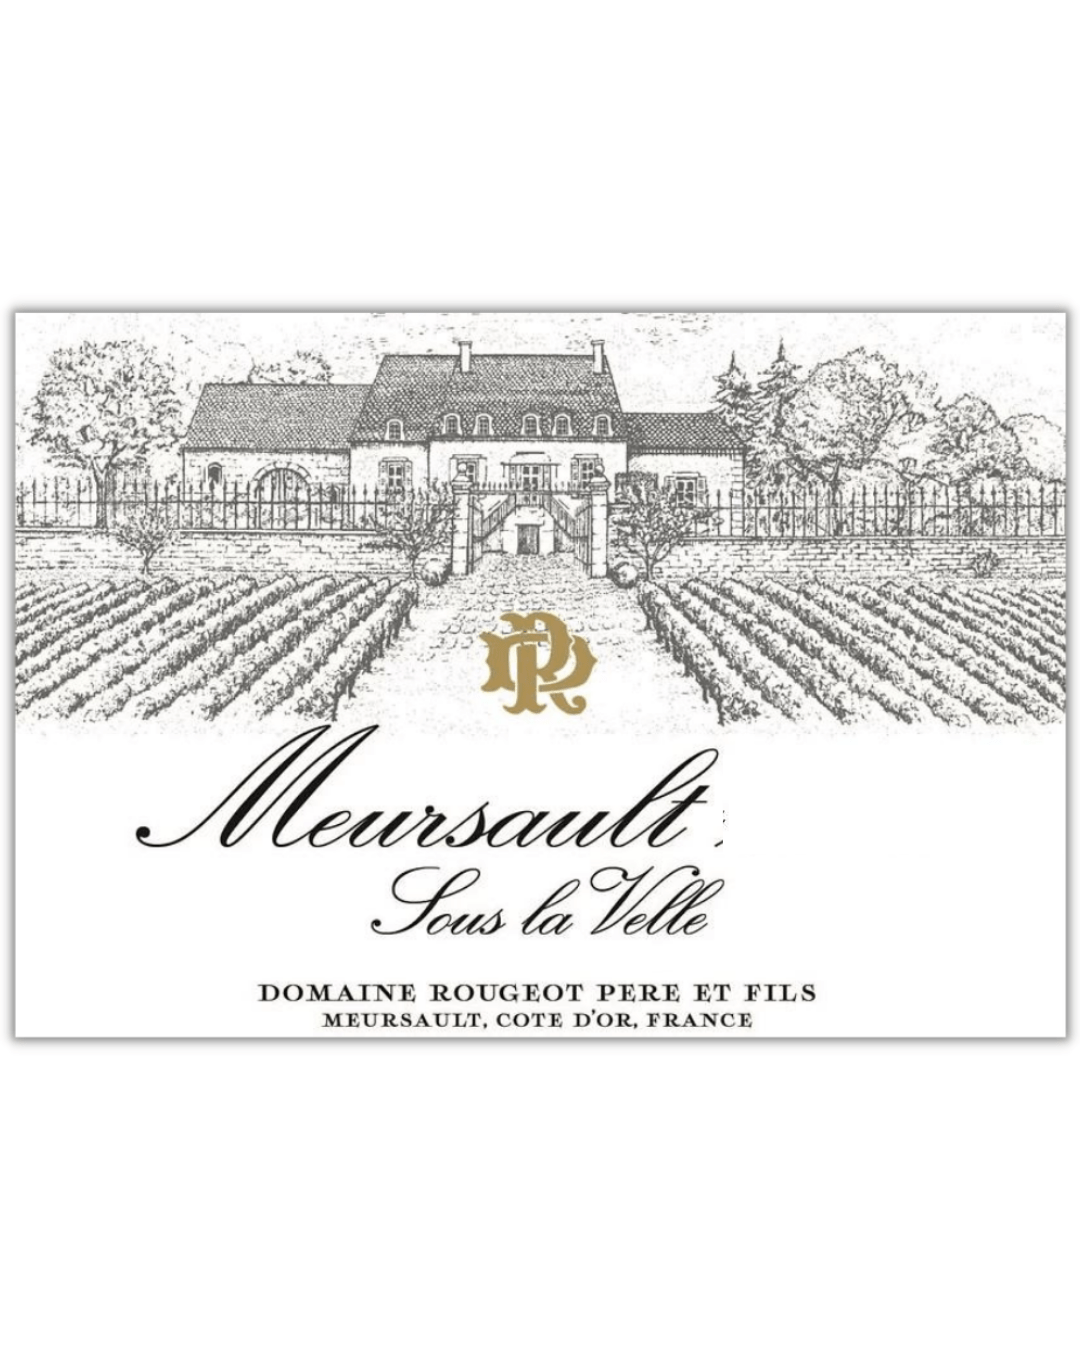 Shop Domaine Rougeot Père & Fils Domaine Rougeot | Meursault Sous la Velle 2019 online at PENTICTON artisanal French wine store in Hong Kong. Discover other French wines, promotions, workshops and featured offers at pentictonpacific.com 